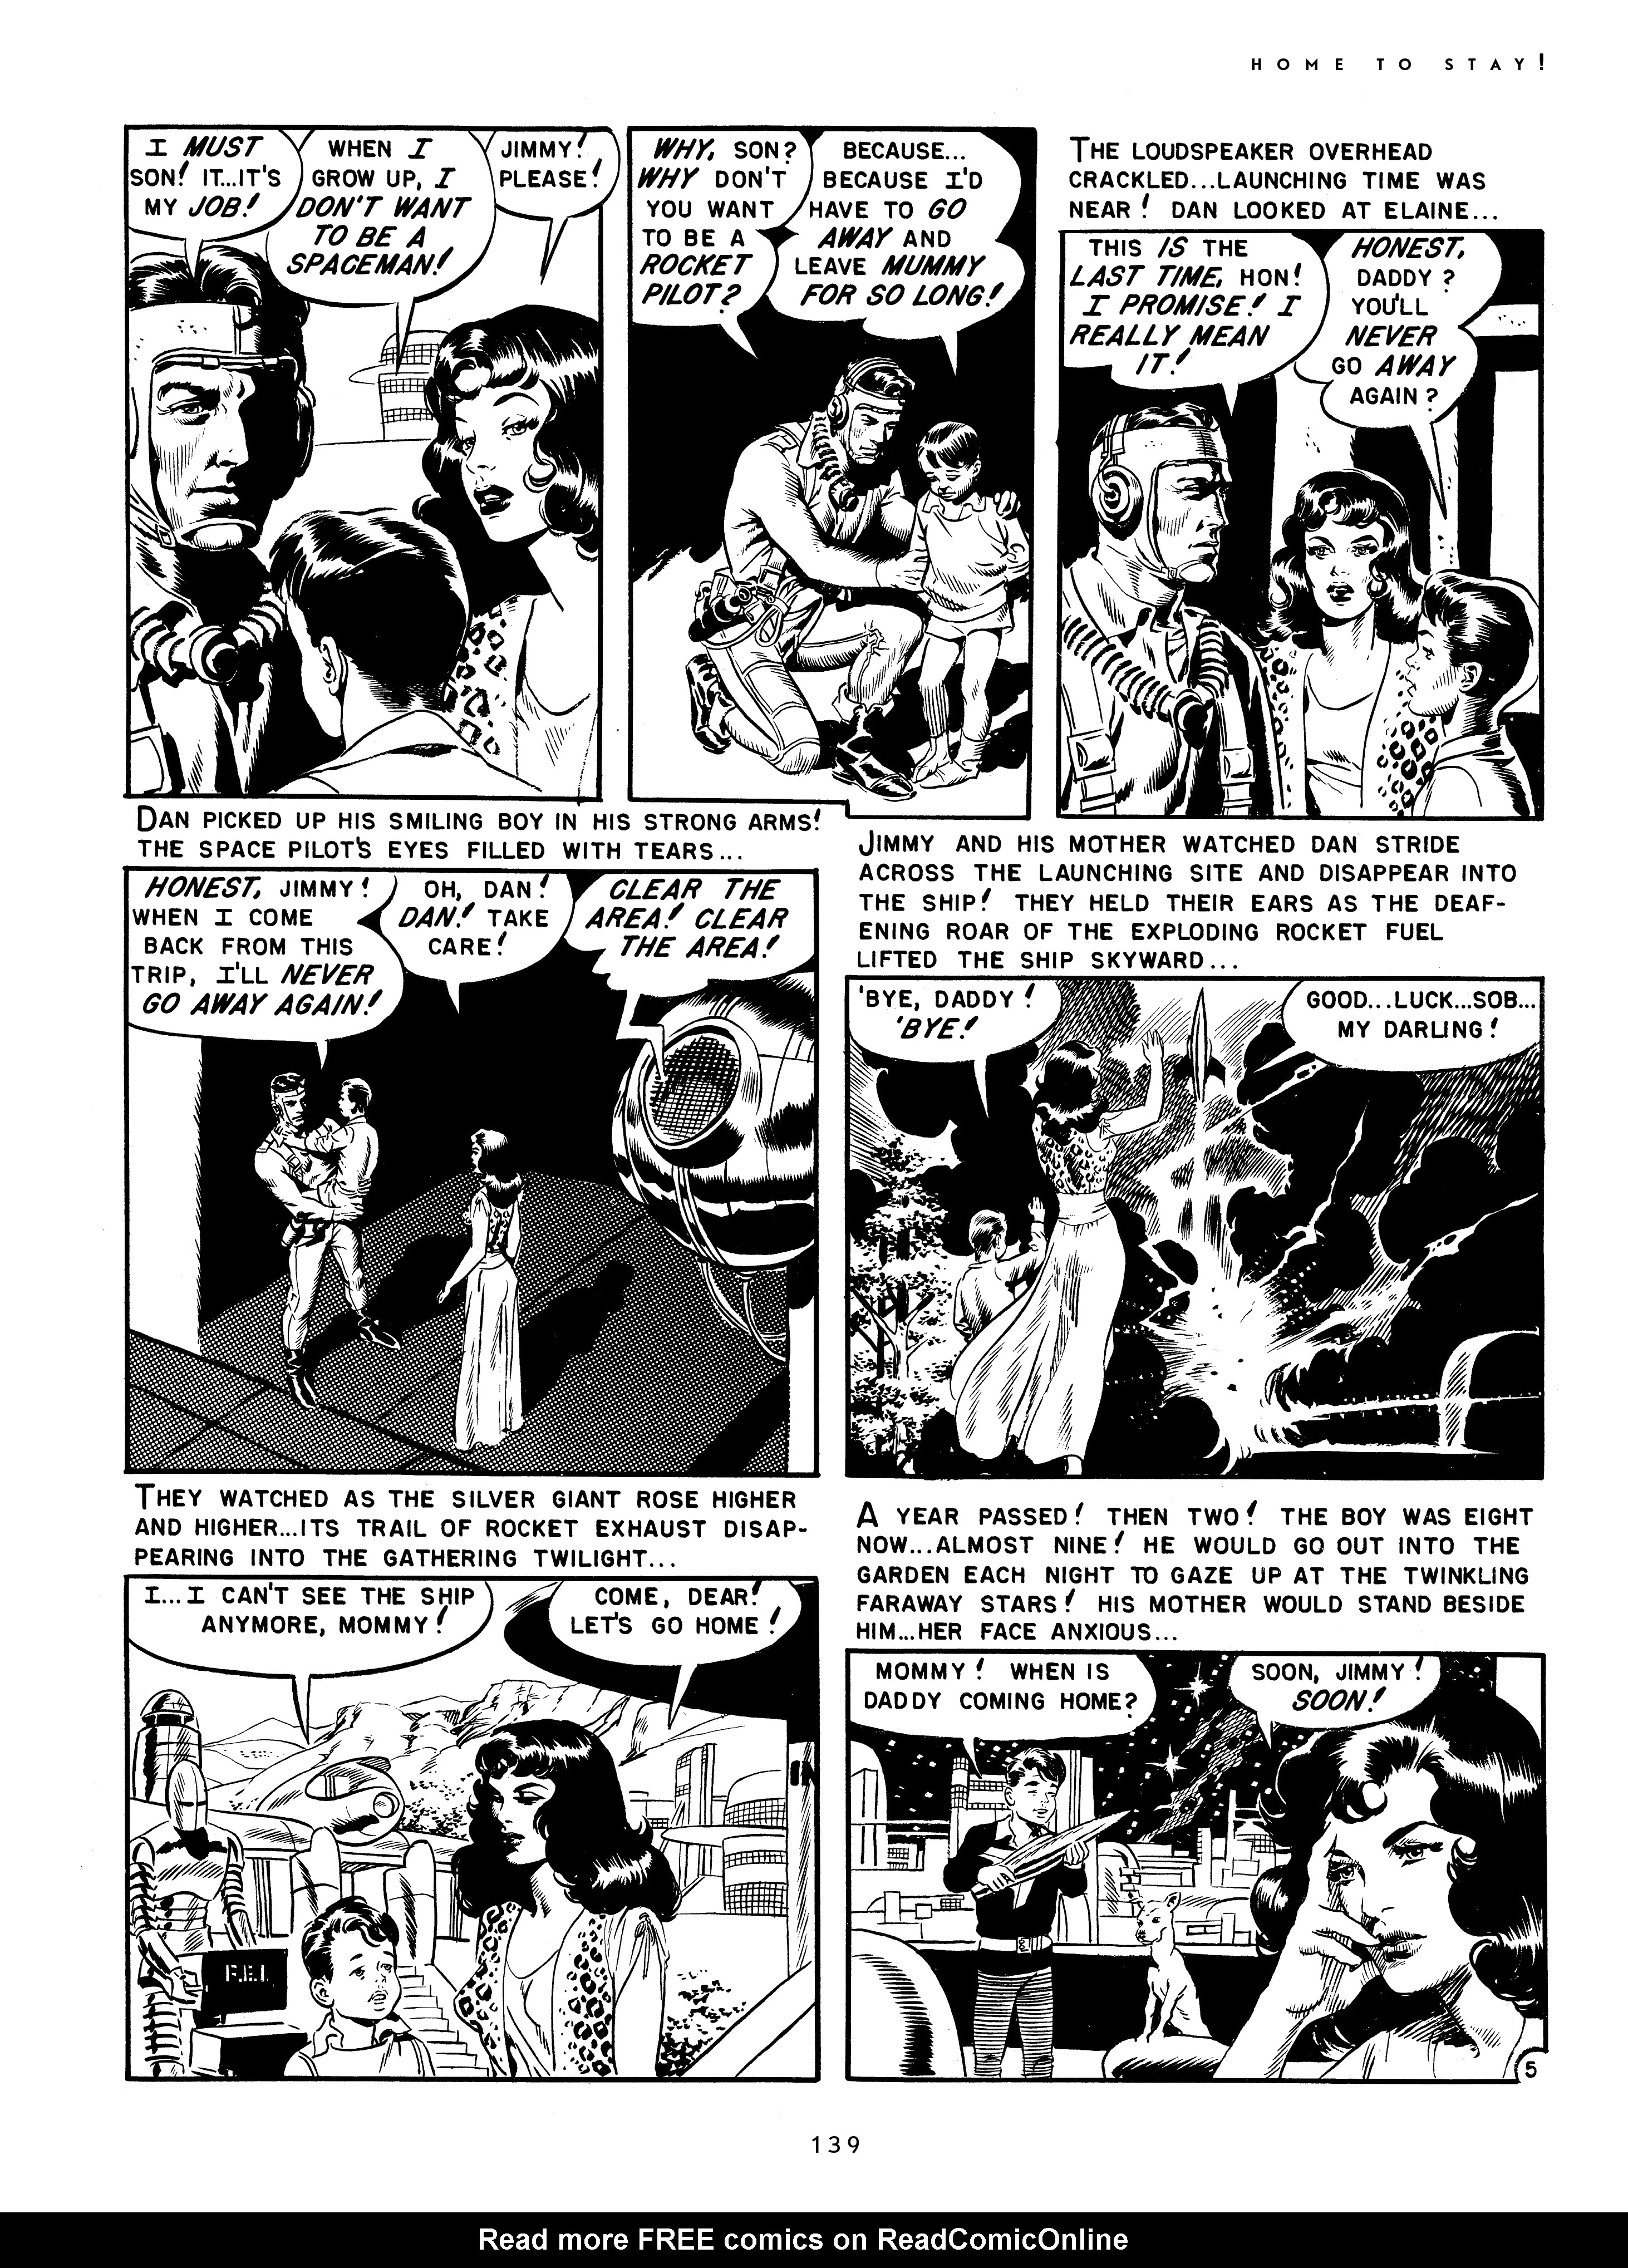 Read online Home to Stay!: The Complete Ray Bradbury EC Stories comic -  Issue # TPB (Part 2) - 62